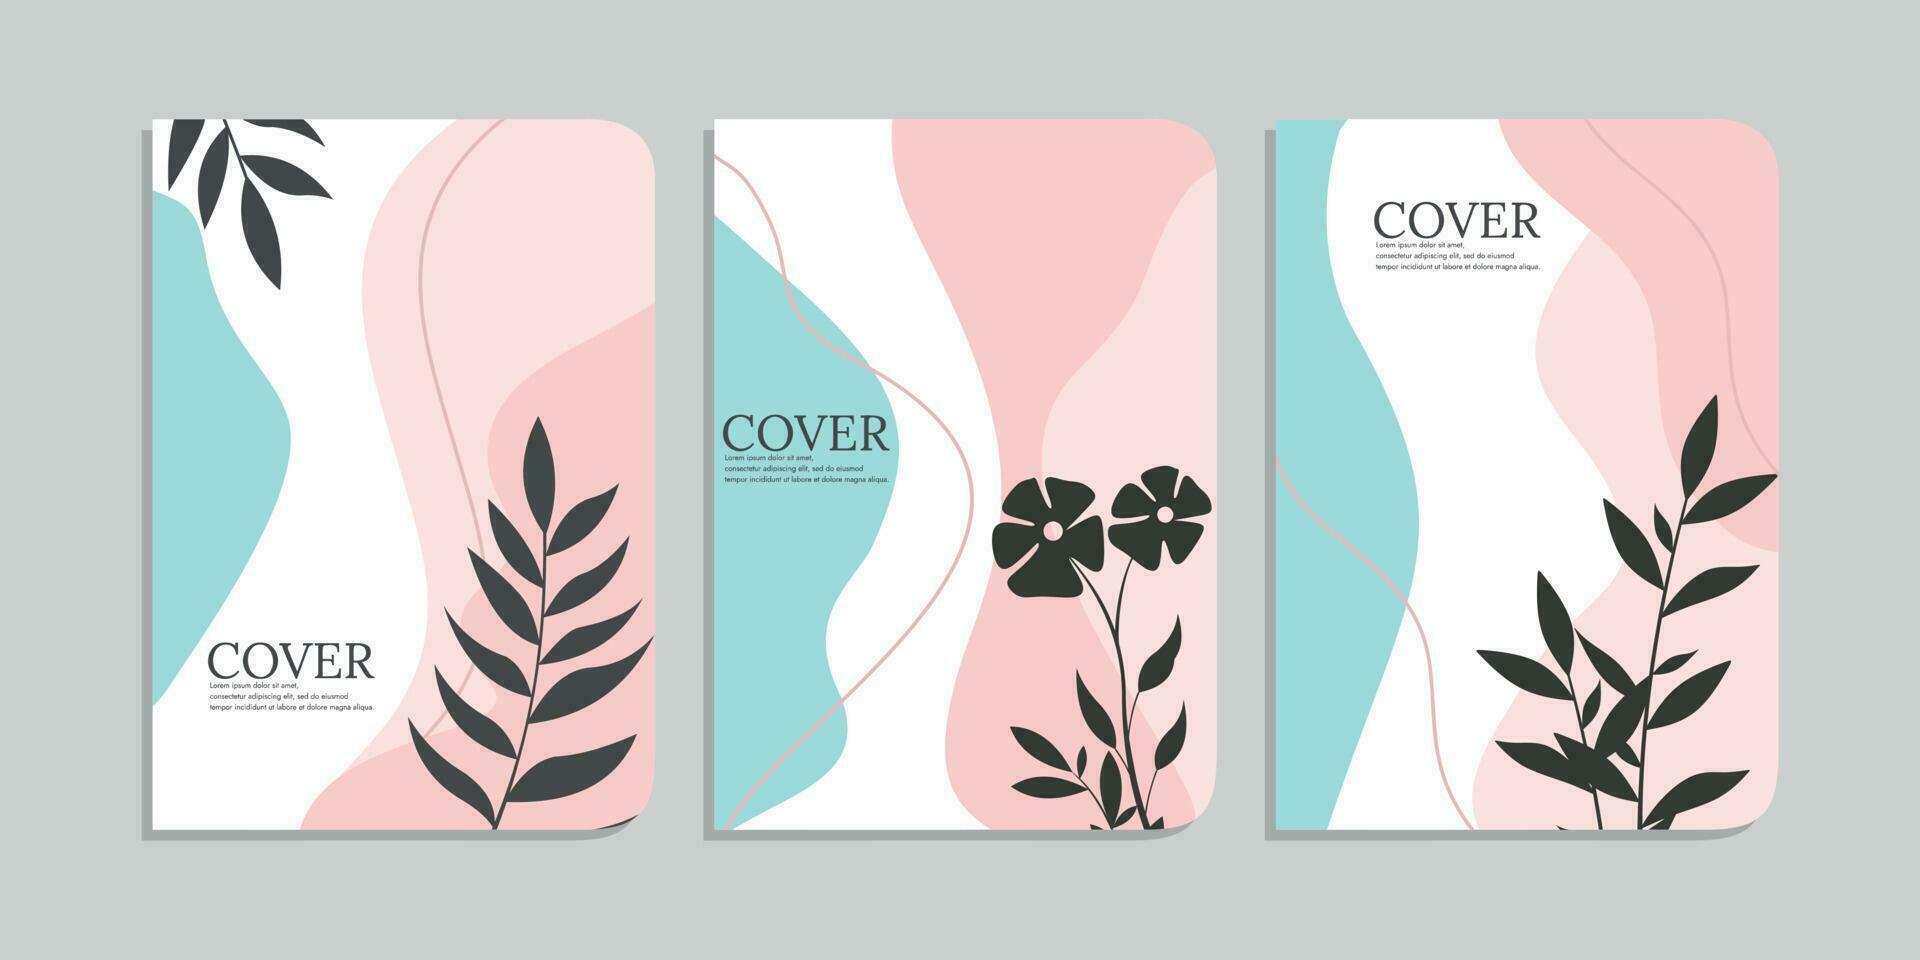 set of book cover template with hand drawn foliage decorations. abstract retro floral background. size A4 For notebooks, diary, planners, brochures, books, catalogs vector